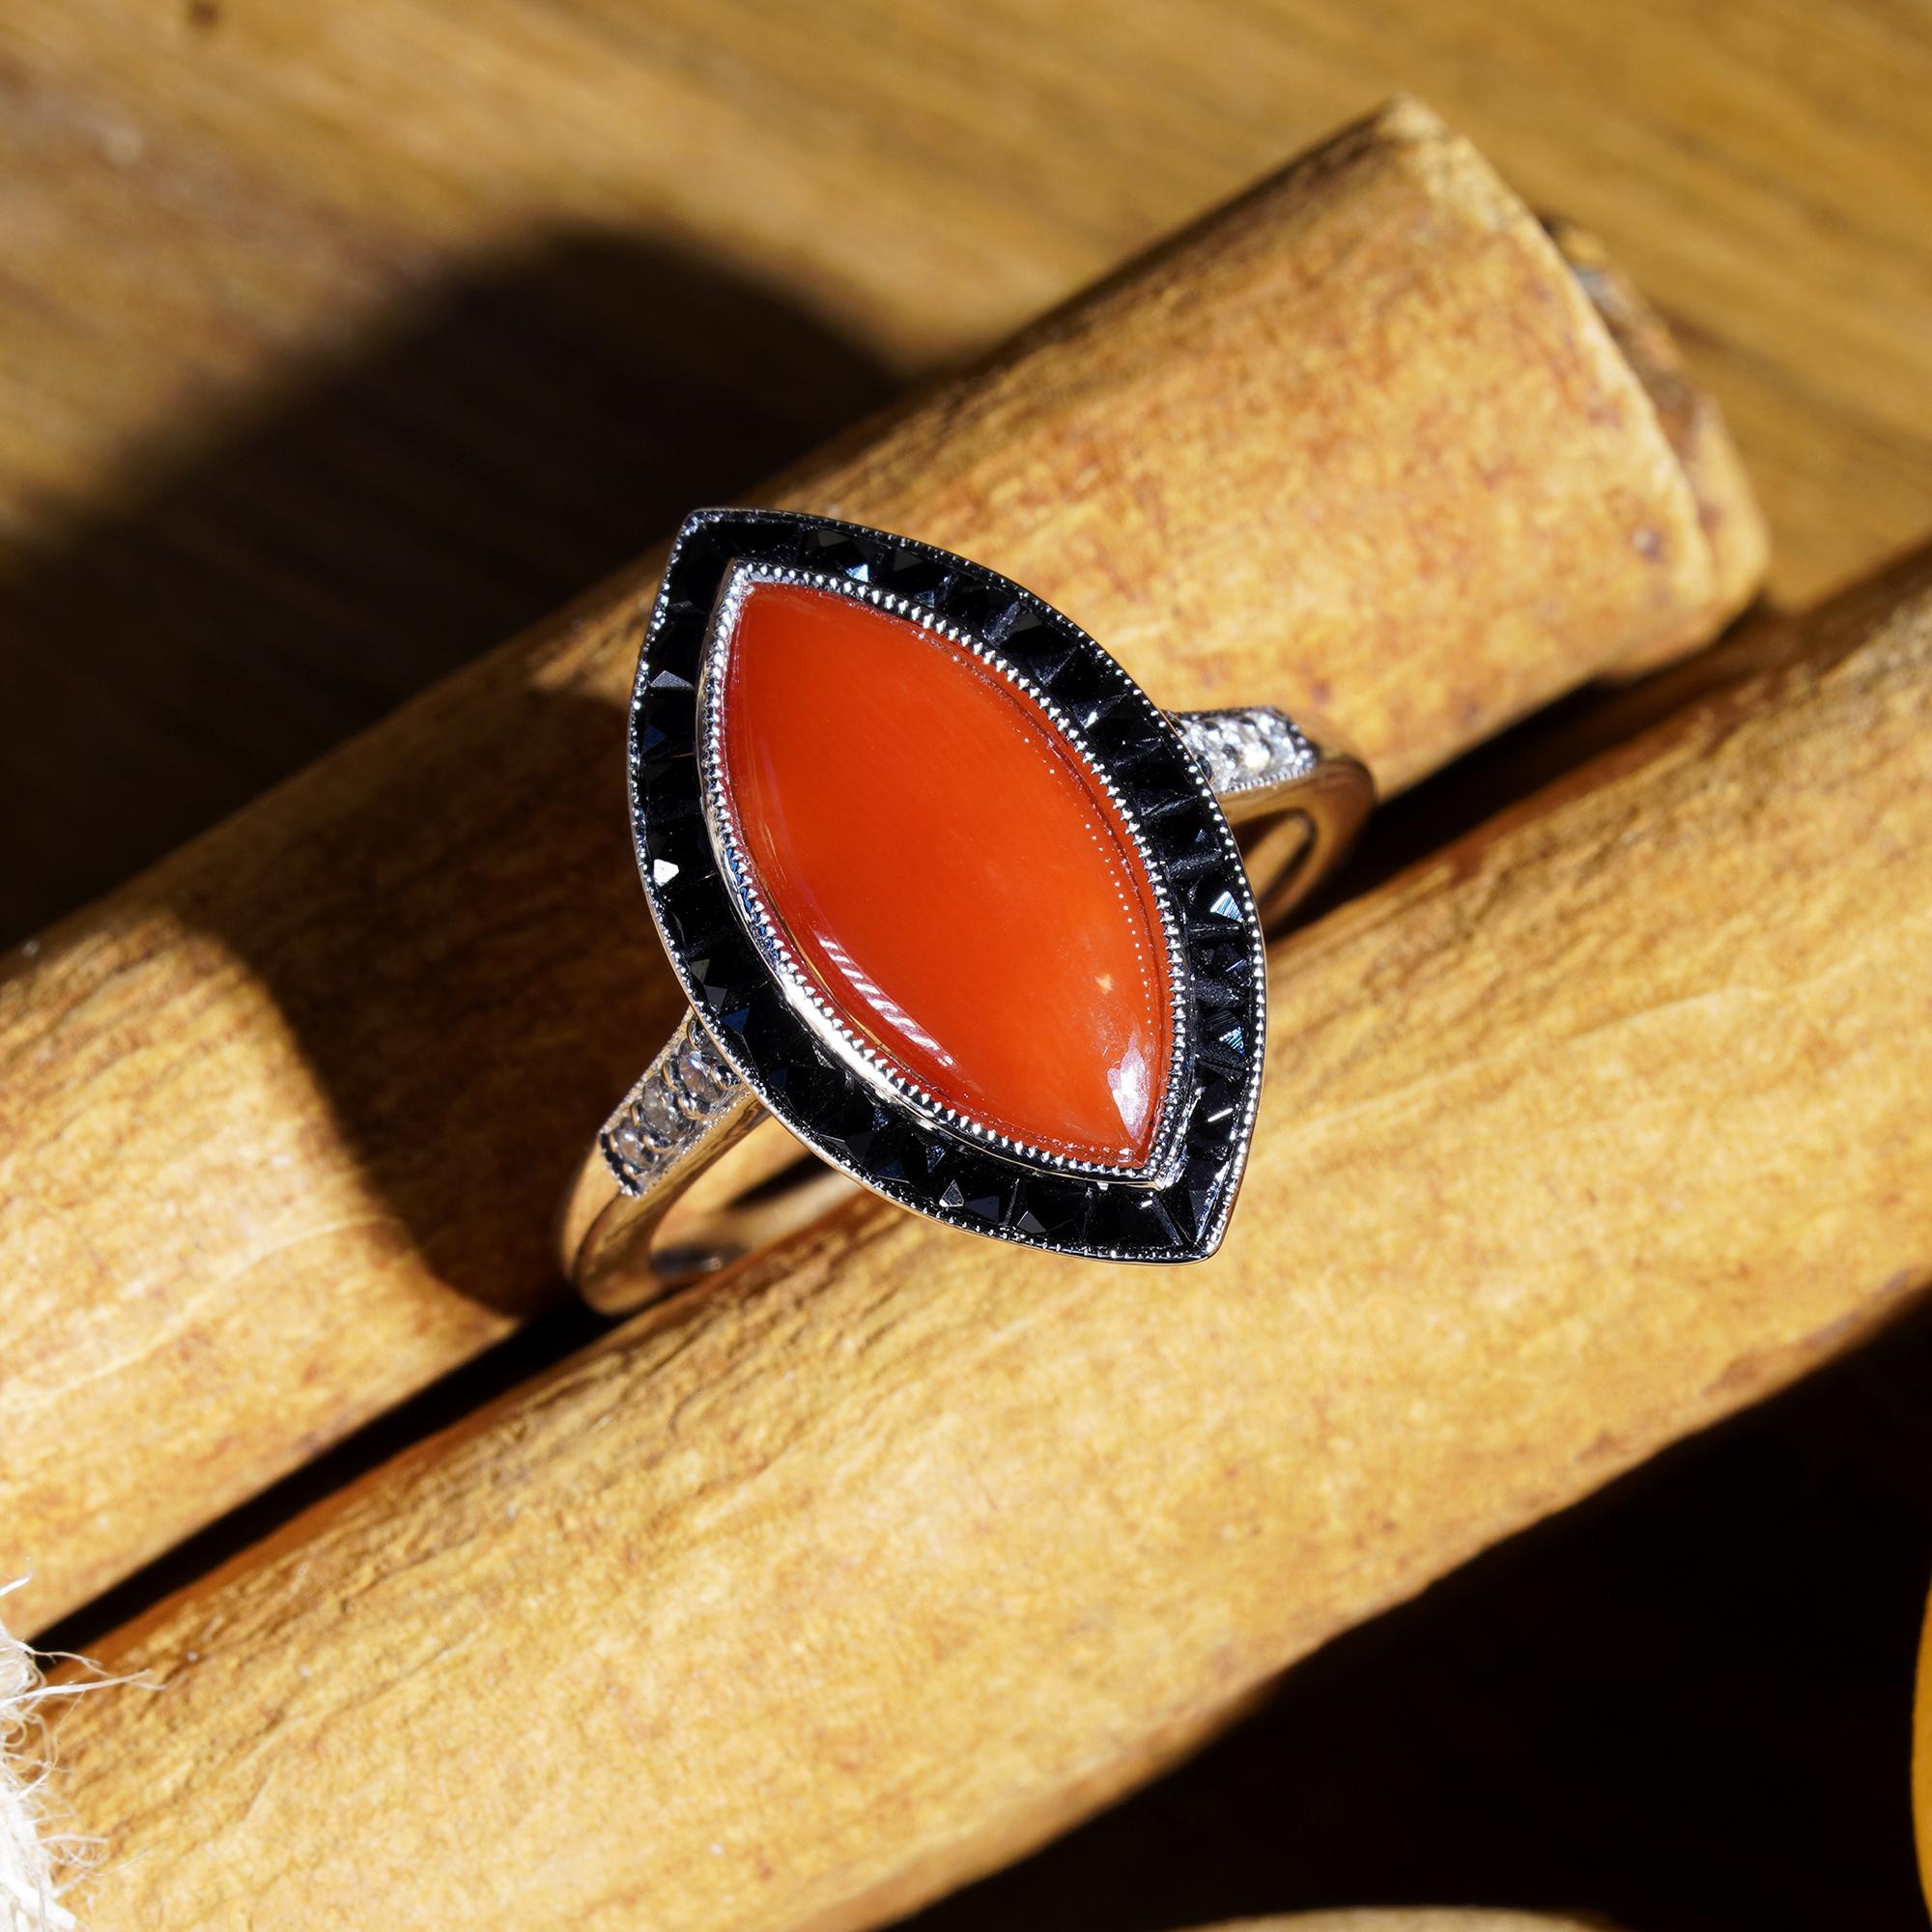 Art Deco Style marquise coral with onyx and diamonds ring in 14k white gold. Centered with an estimated 1.20 carat marquise shaped AKA coral in a milgrain setting, bordered by a row of French cut black onyx and flanked to either side with diamond